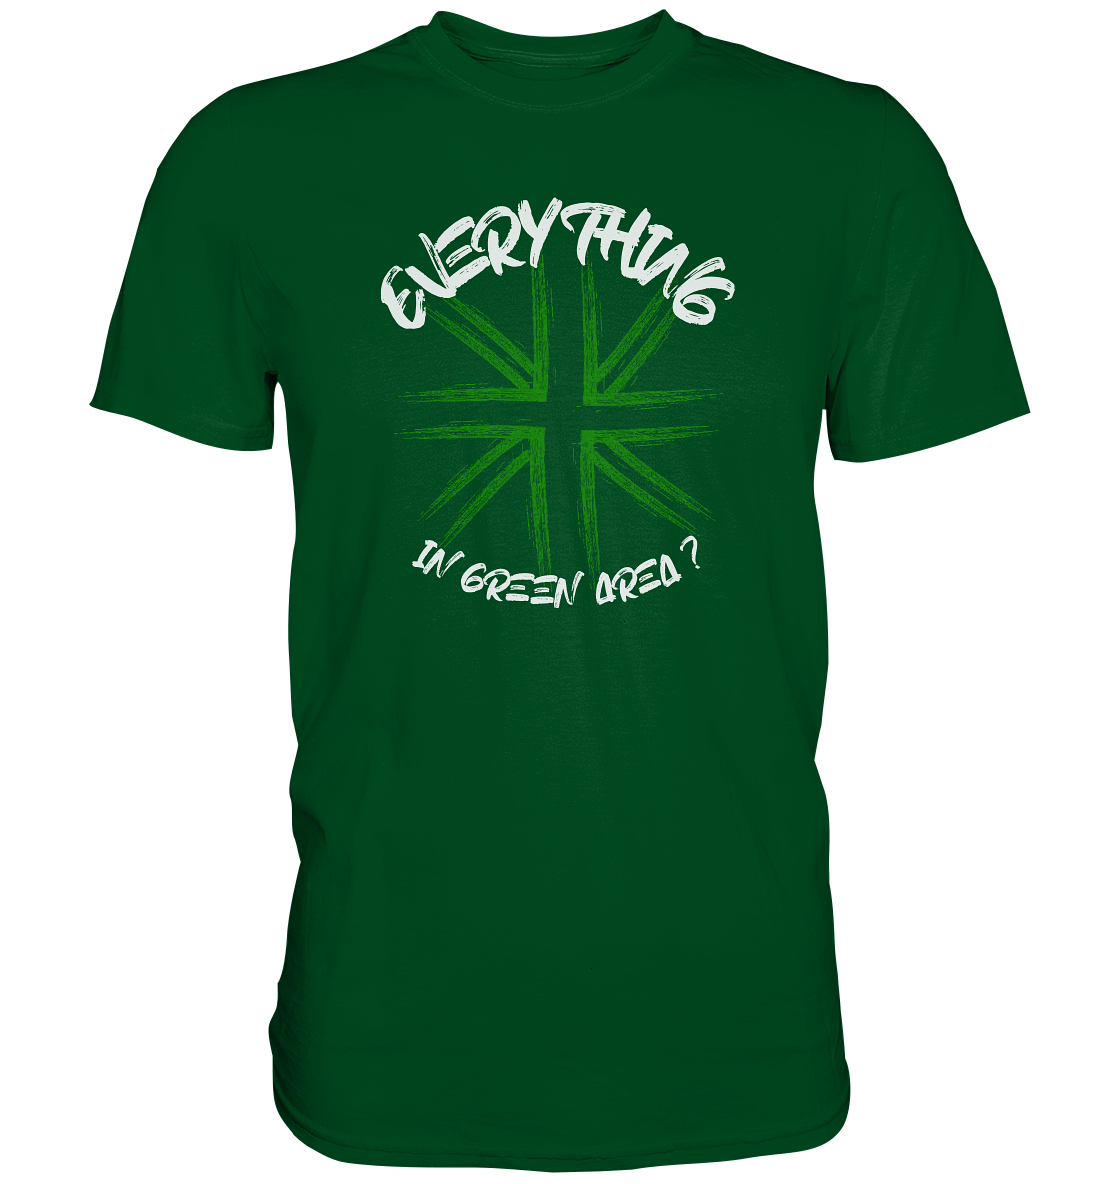 "Everything in green Area? - Premium Shirt